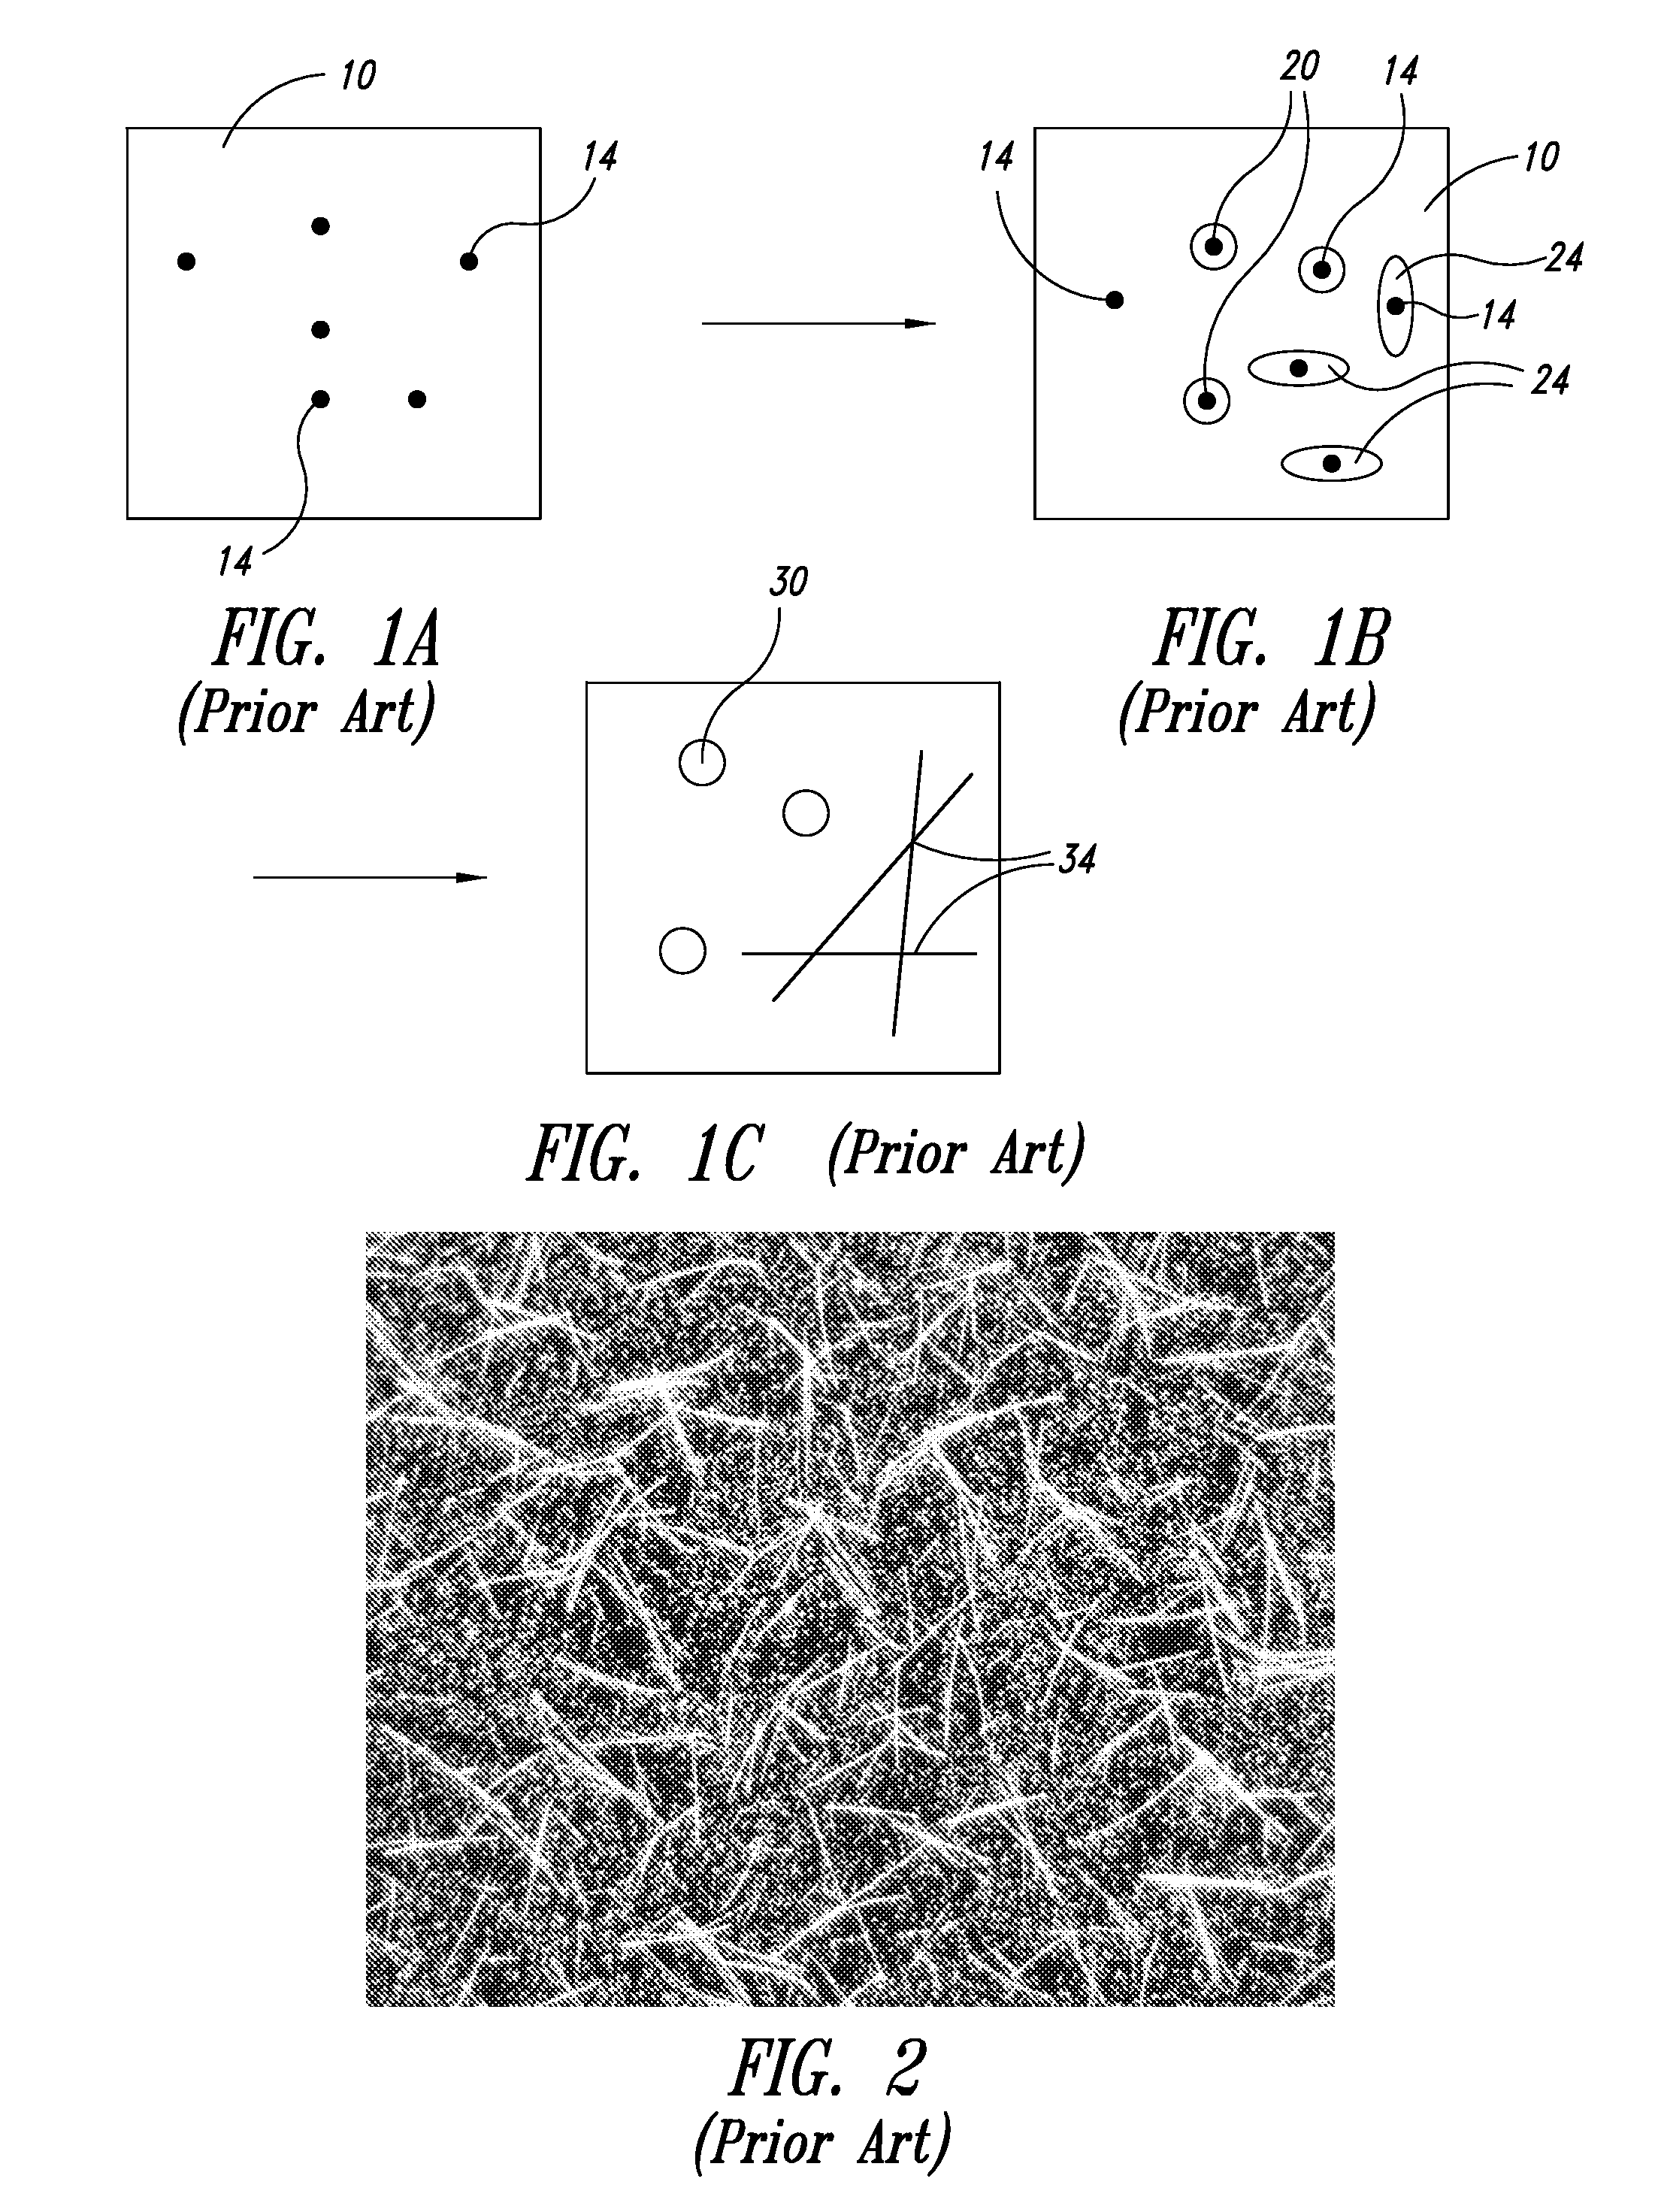 Methods of controlling nanostructure formations and shapes